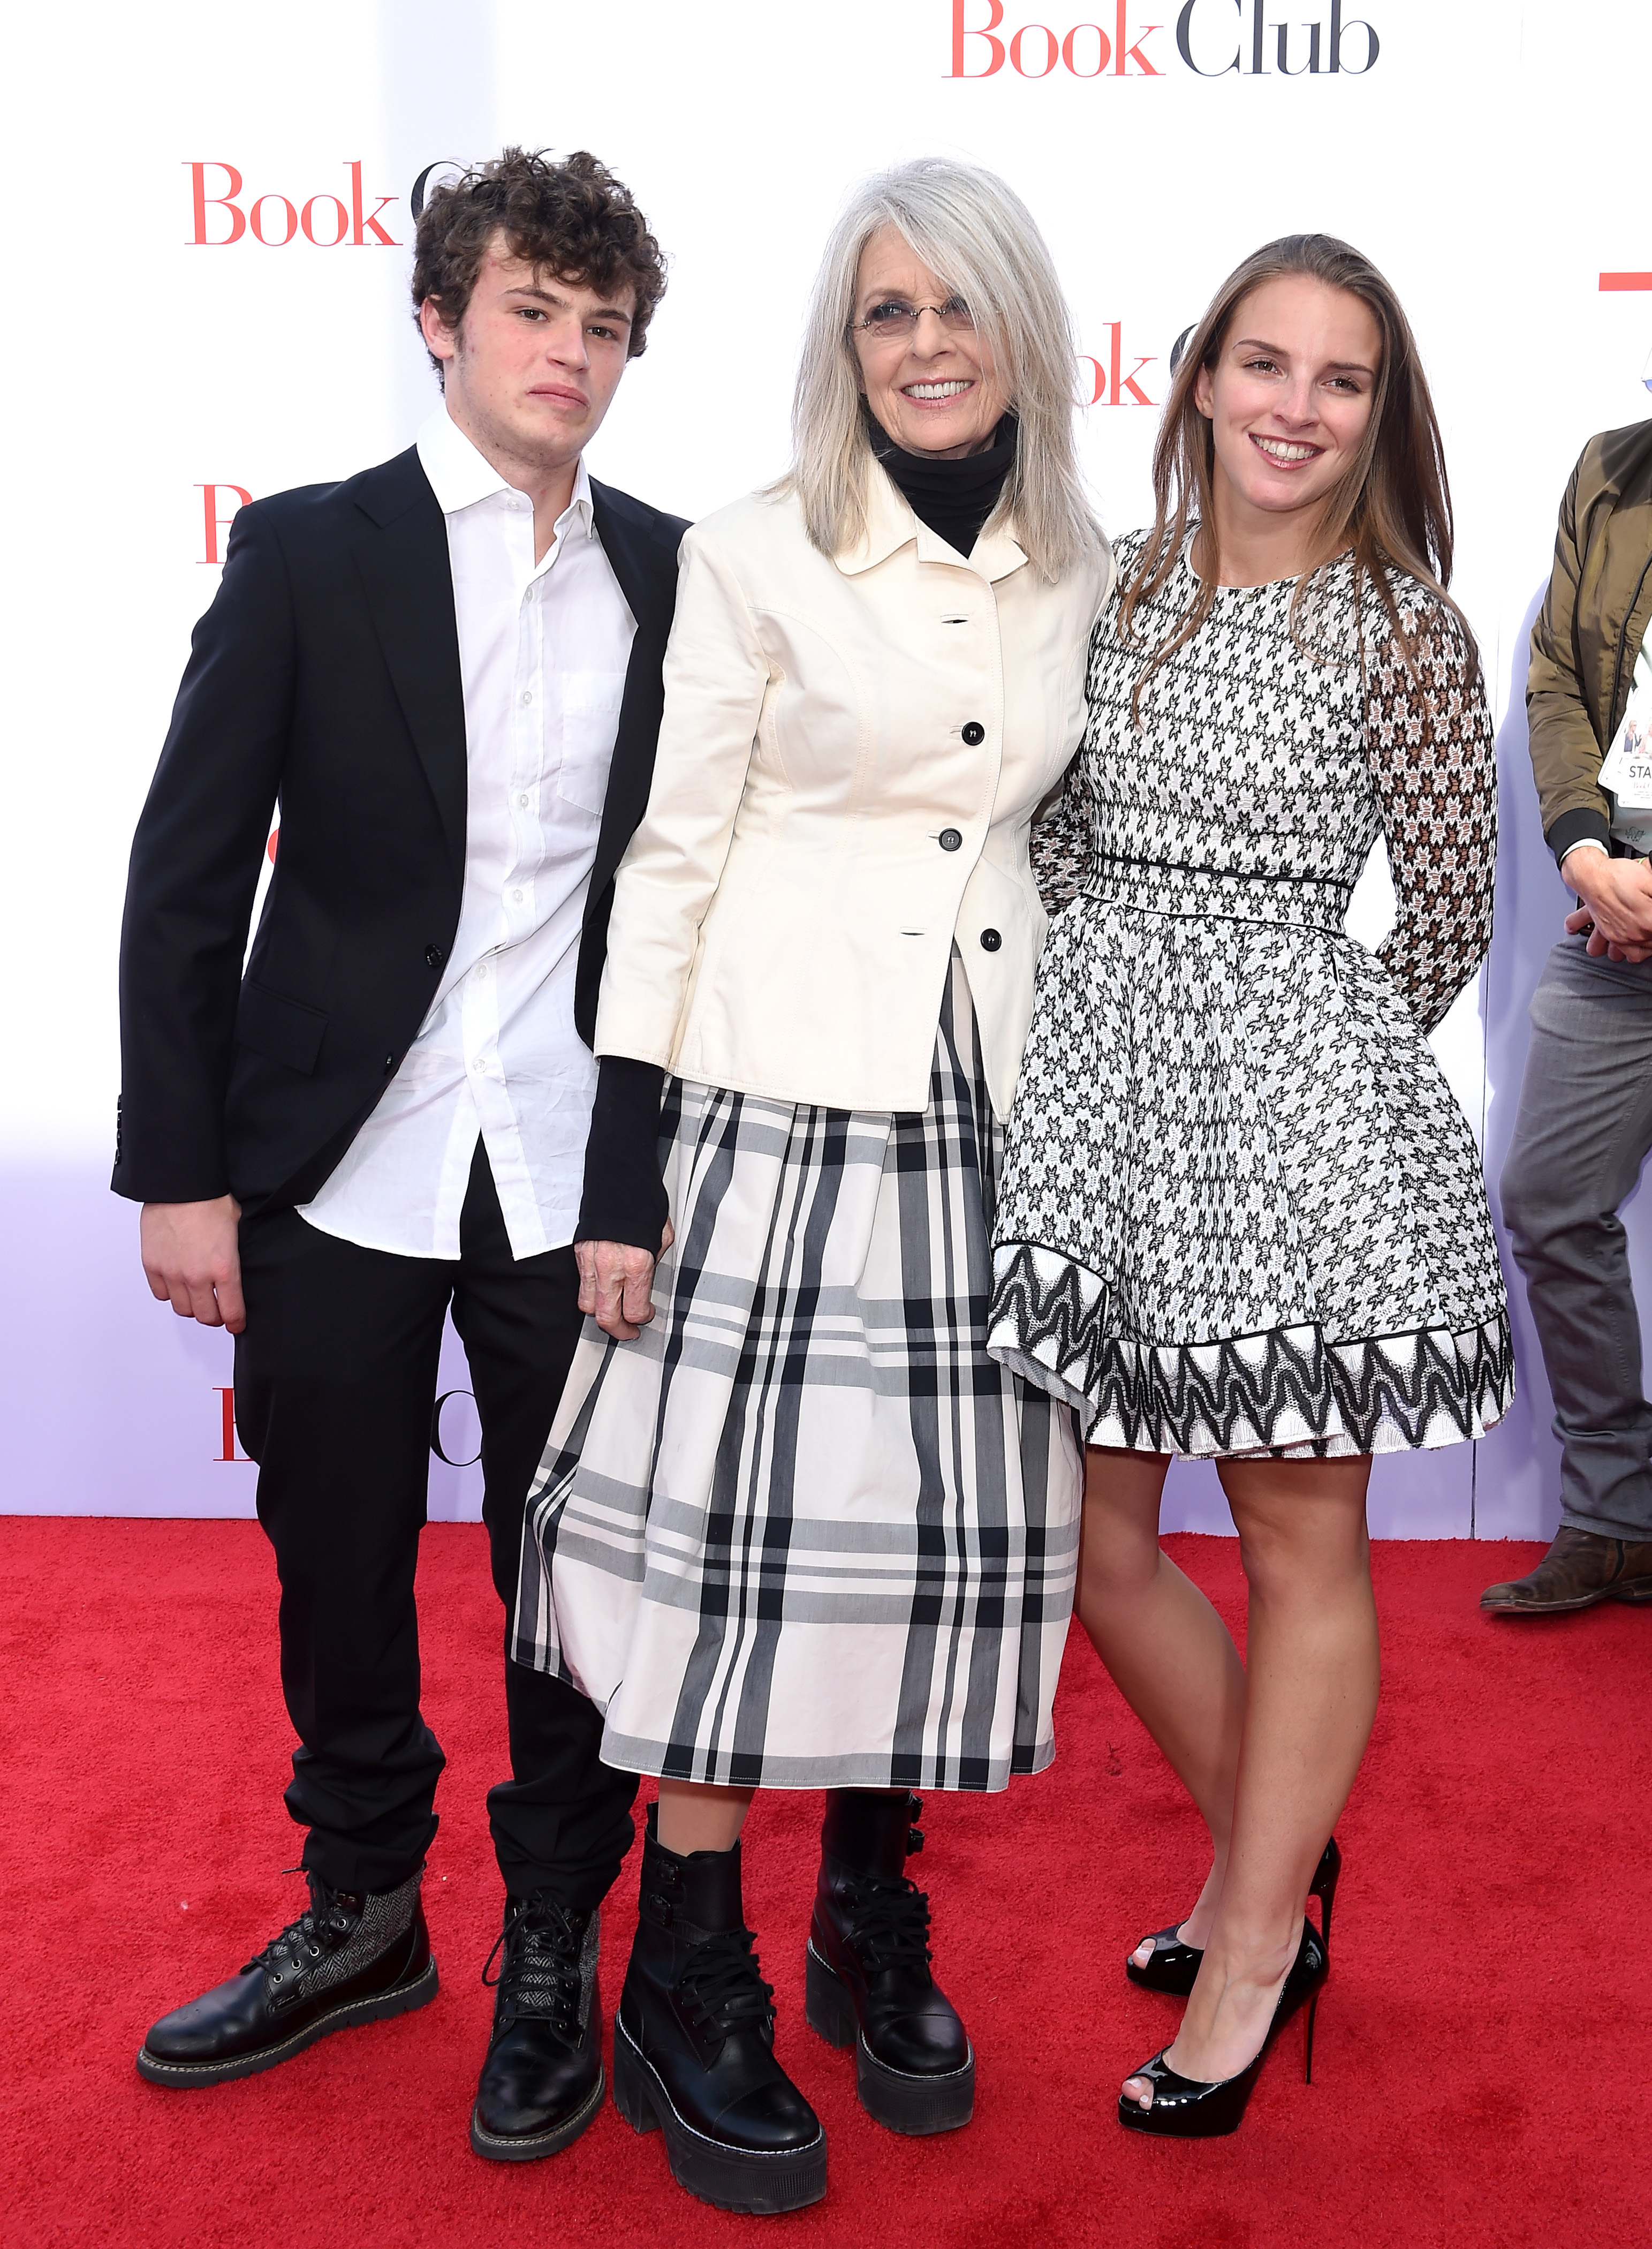 Diane Keaton with her kids on the red carpet